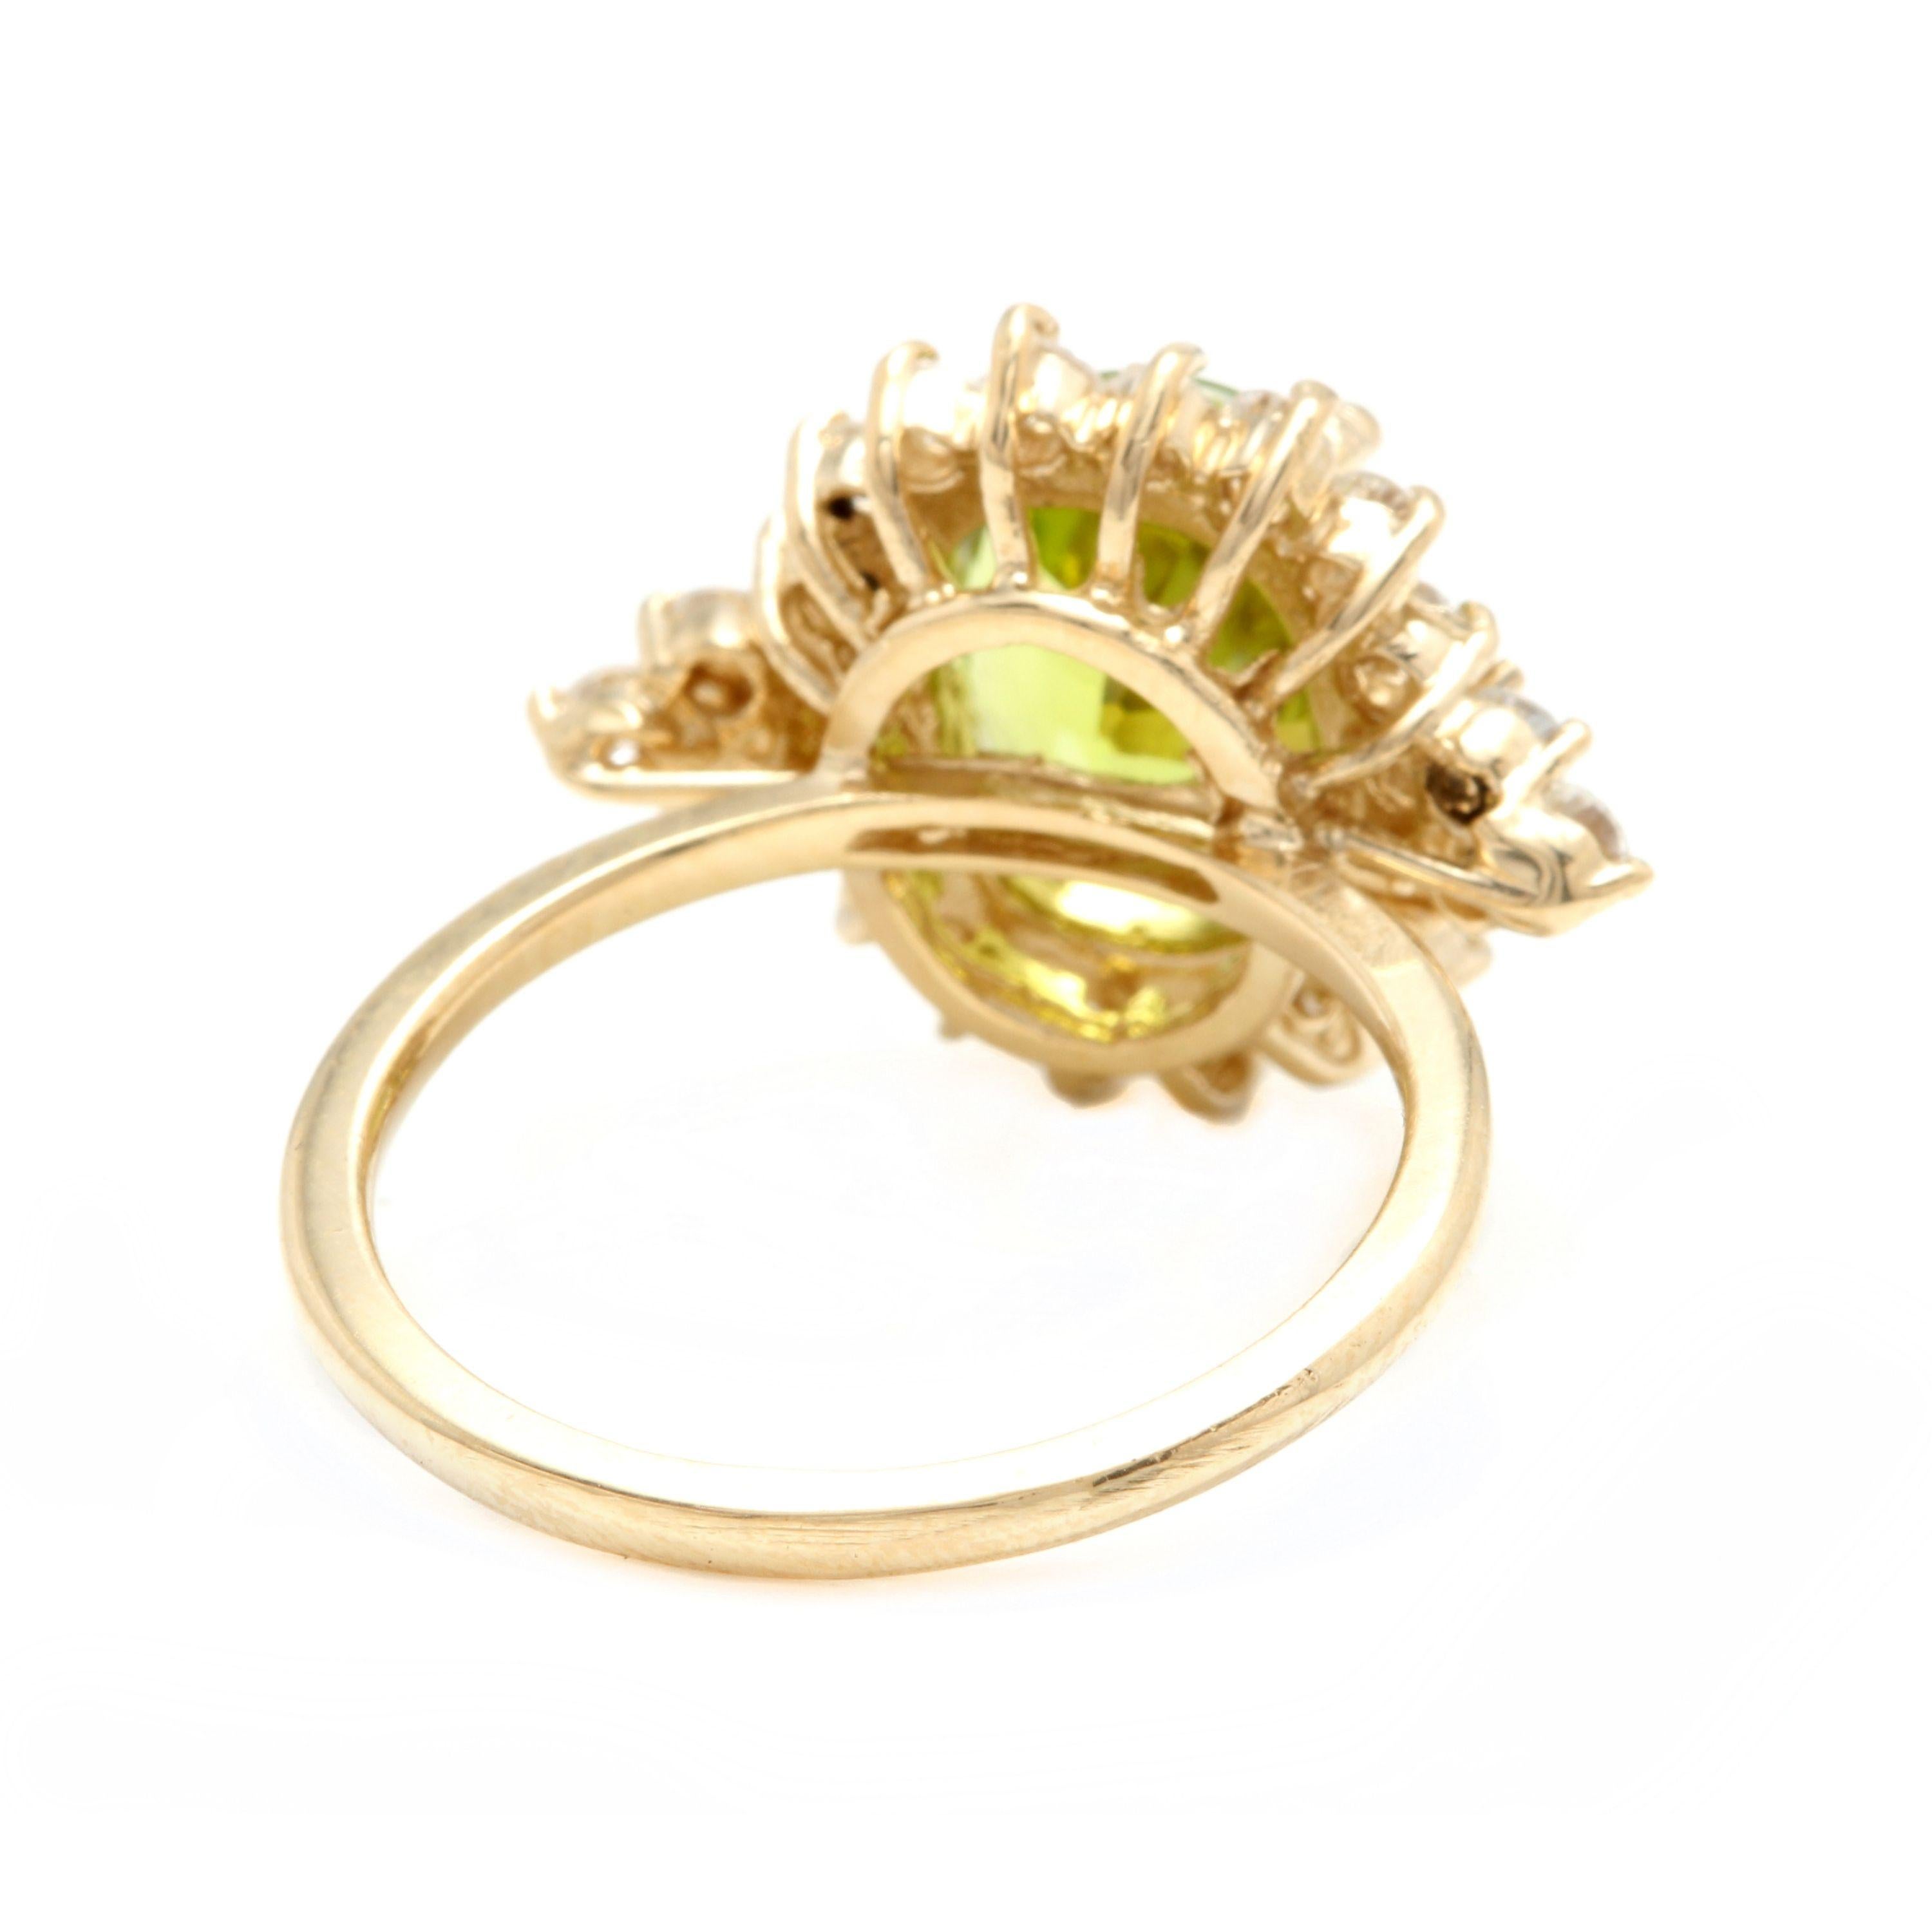 4.35 Carat Natural Peridot and Diamond 14 Karat Solid Yellow Gold Ring In New Condition For Sale In Los Angeles, CA